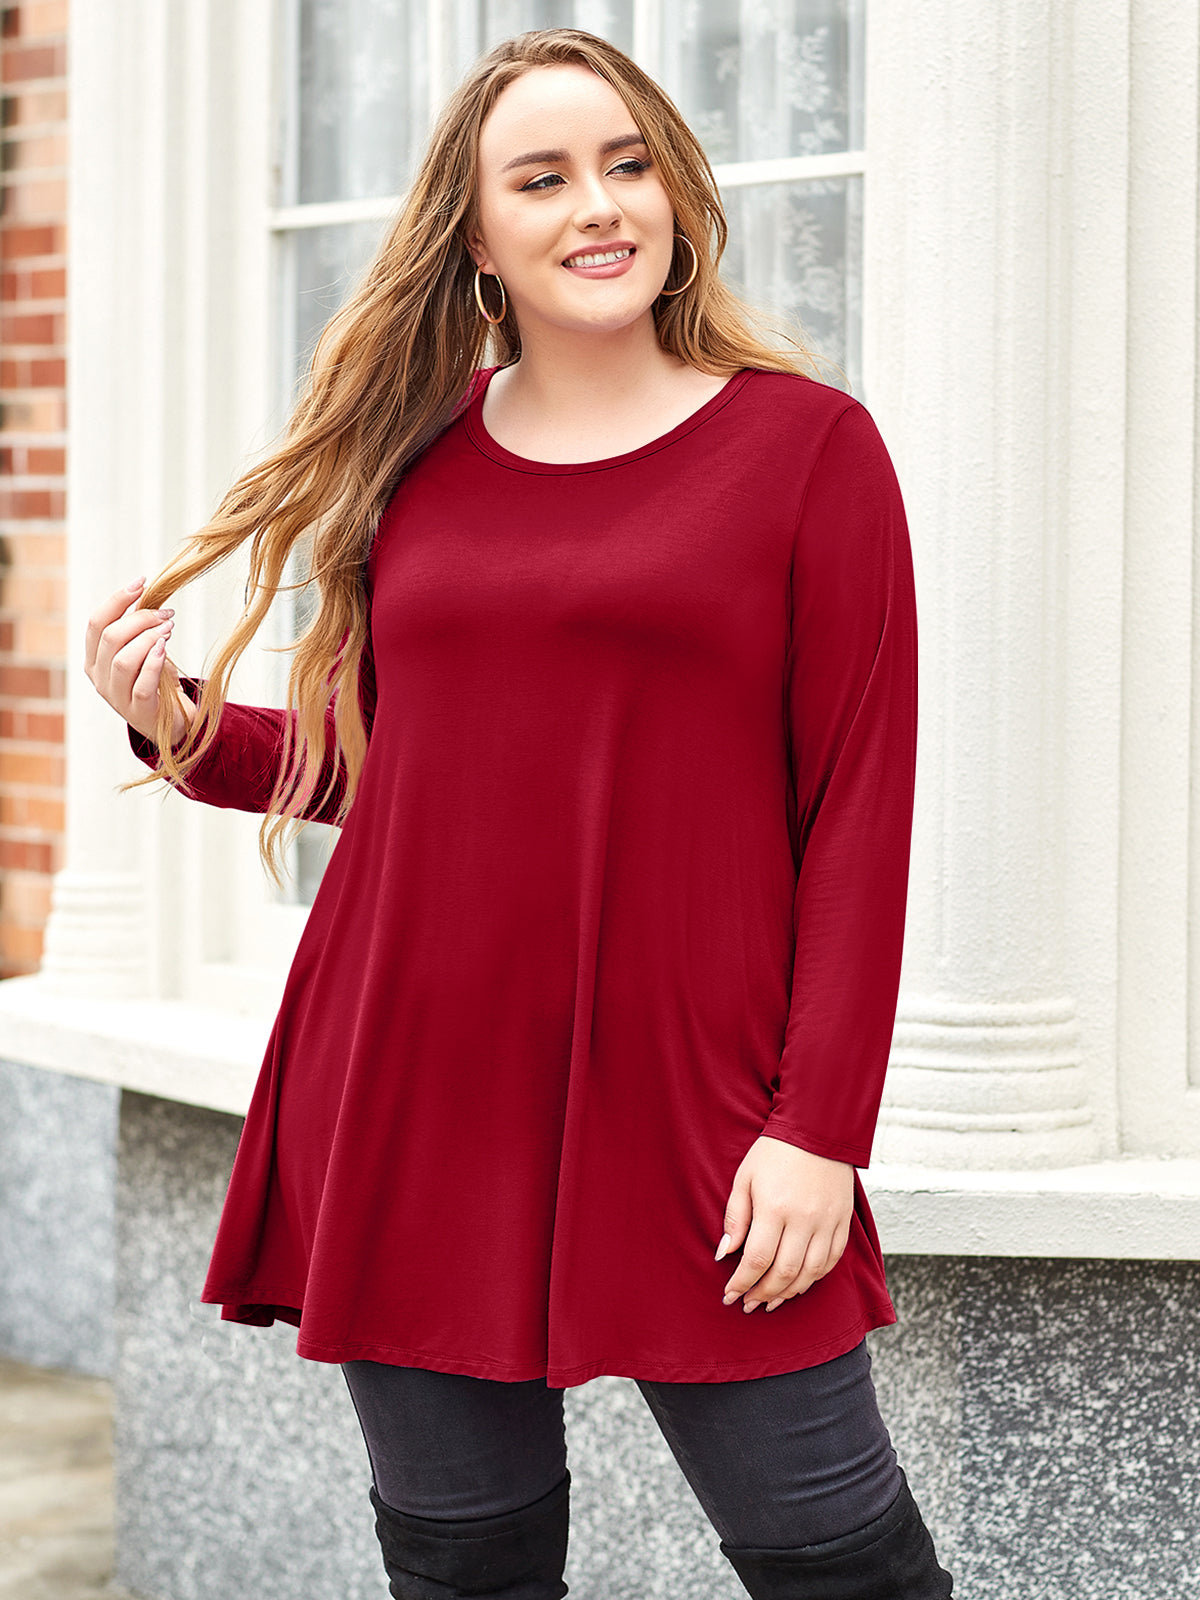 Christmas Tunics for Women,Tunic Tops to wear with Leggings,Long Sleeve  Tunic Tops for Women,Tunic Sweater,Womens Tunic Tops to wear with Leggings,Womens  Tunic Tops,Tunic Tops for Women Loose fit at  Women's Clothing